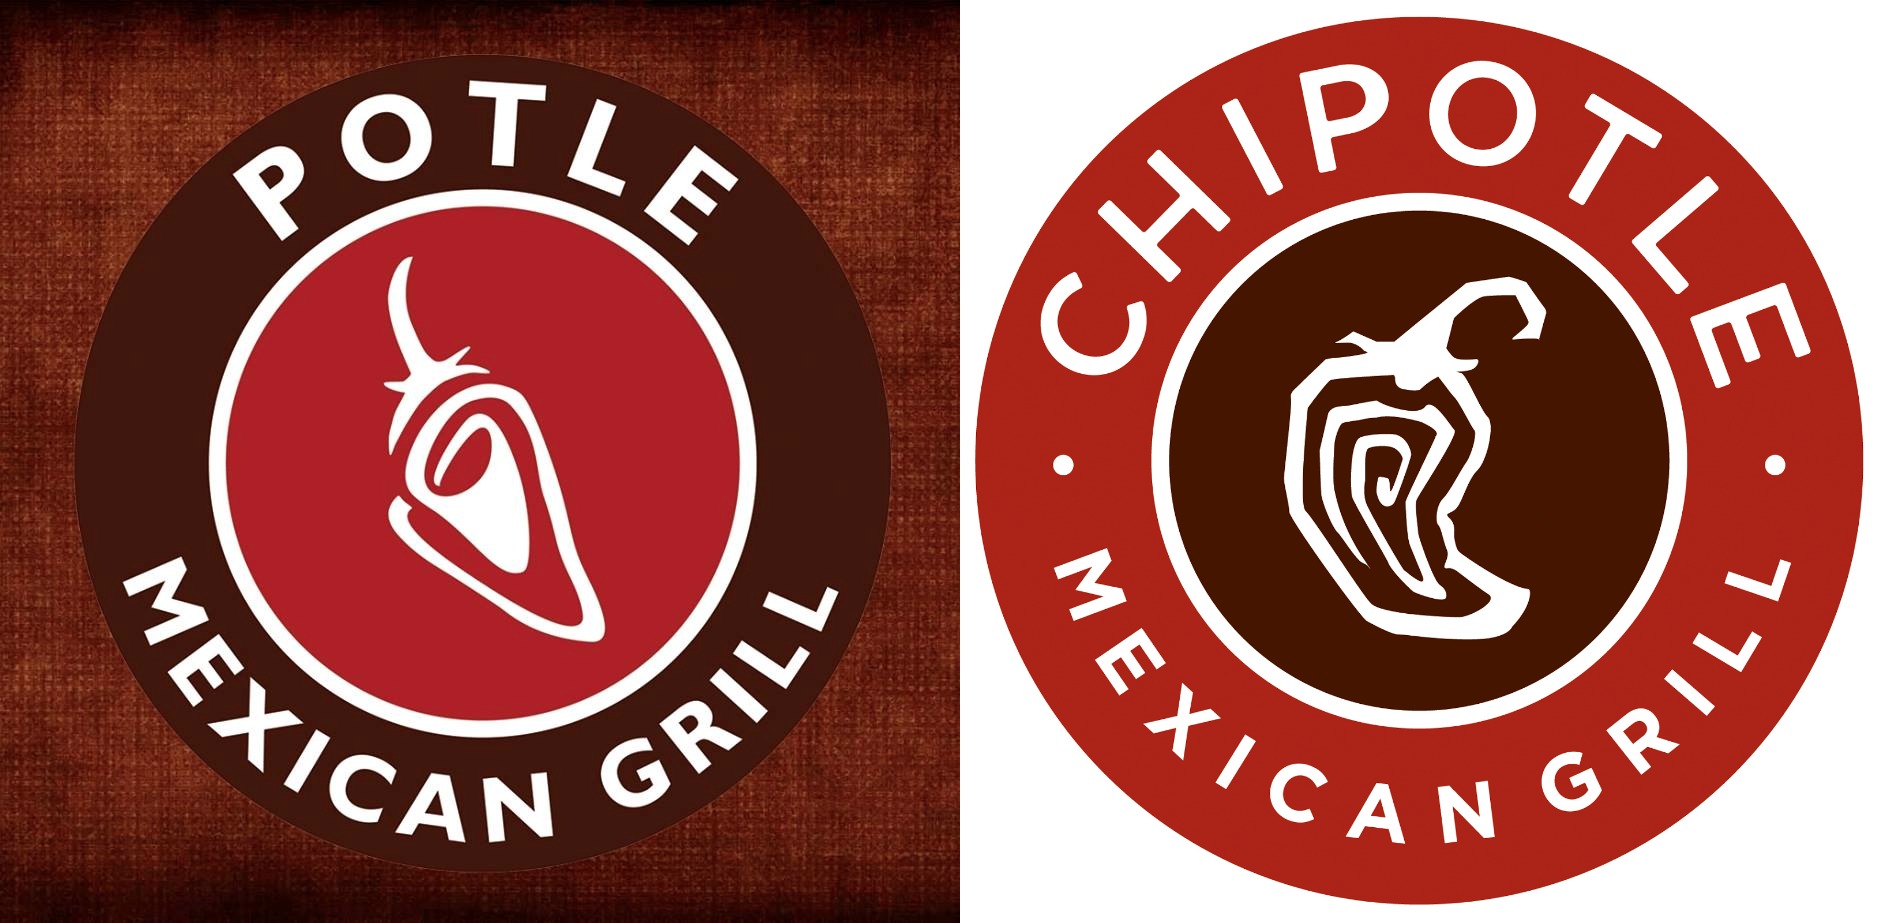 15 Best Photos of Mexican Food Logos